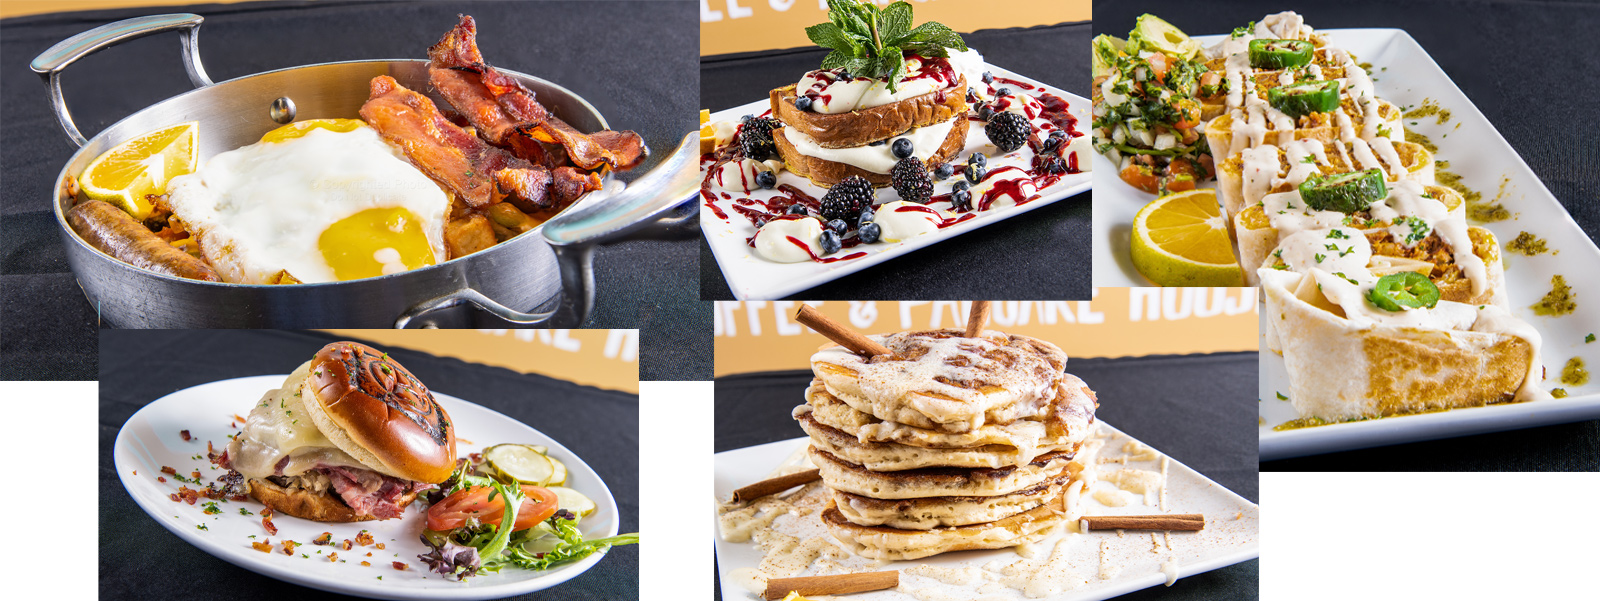 Collage of photos showing the range of food at QC Coffee and Pancake House, including cinnamon roll pancakes, breakfast burgers, wraps, and more